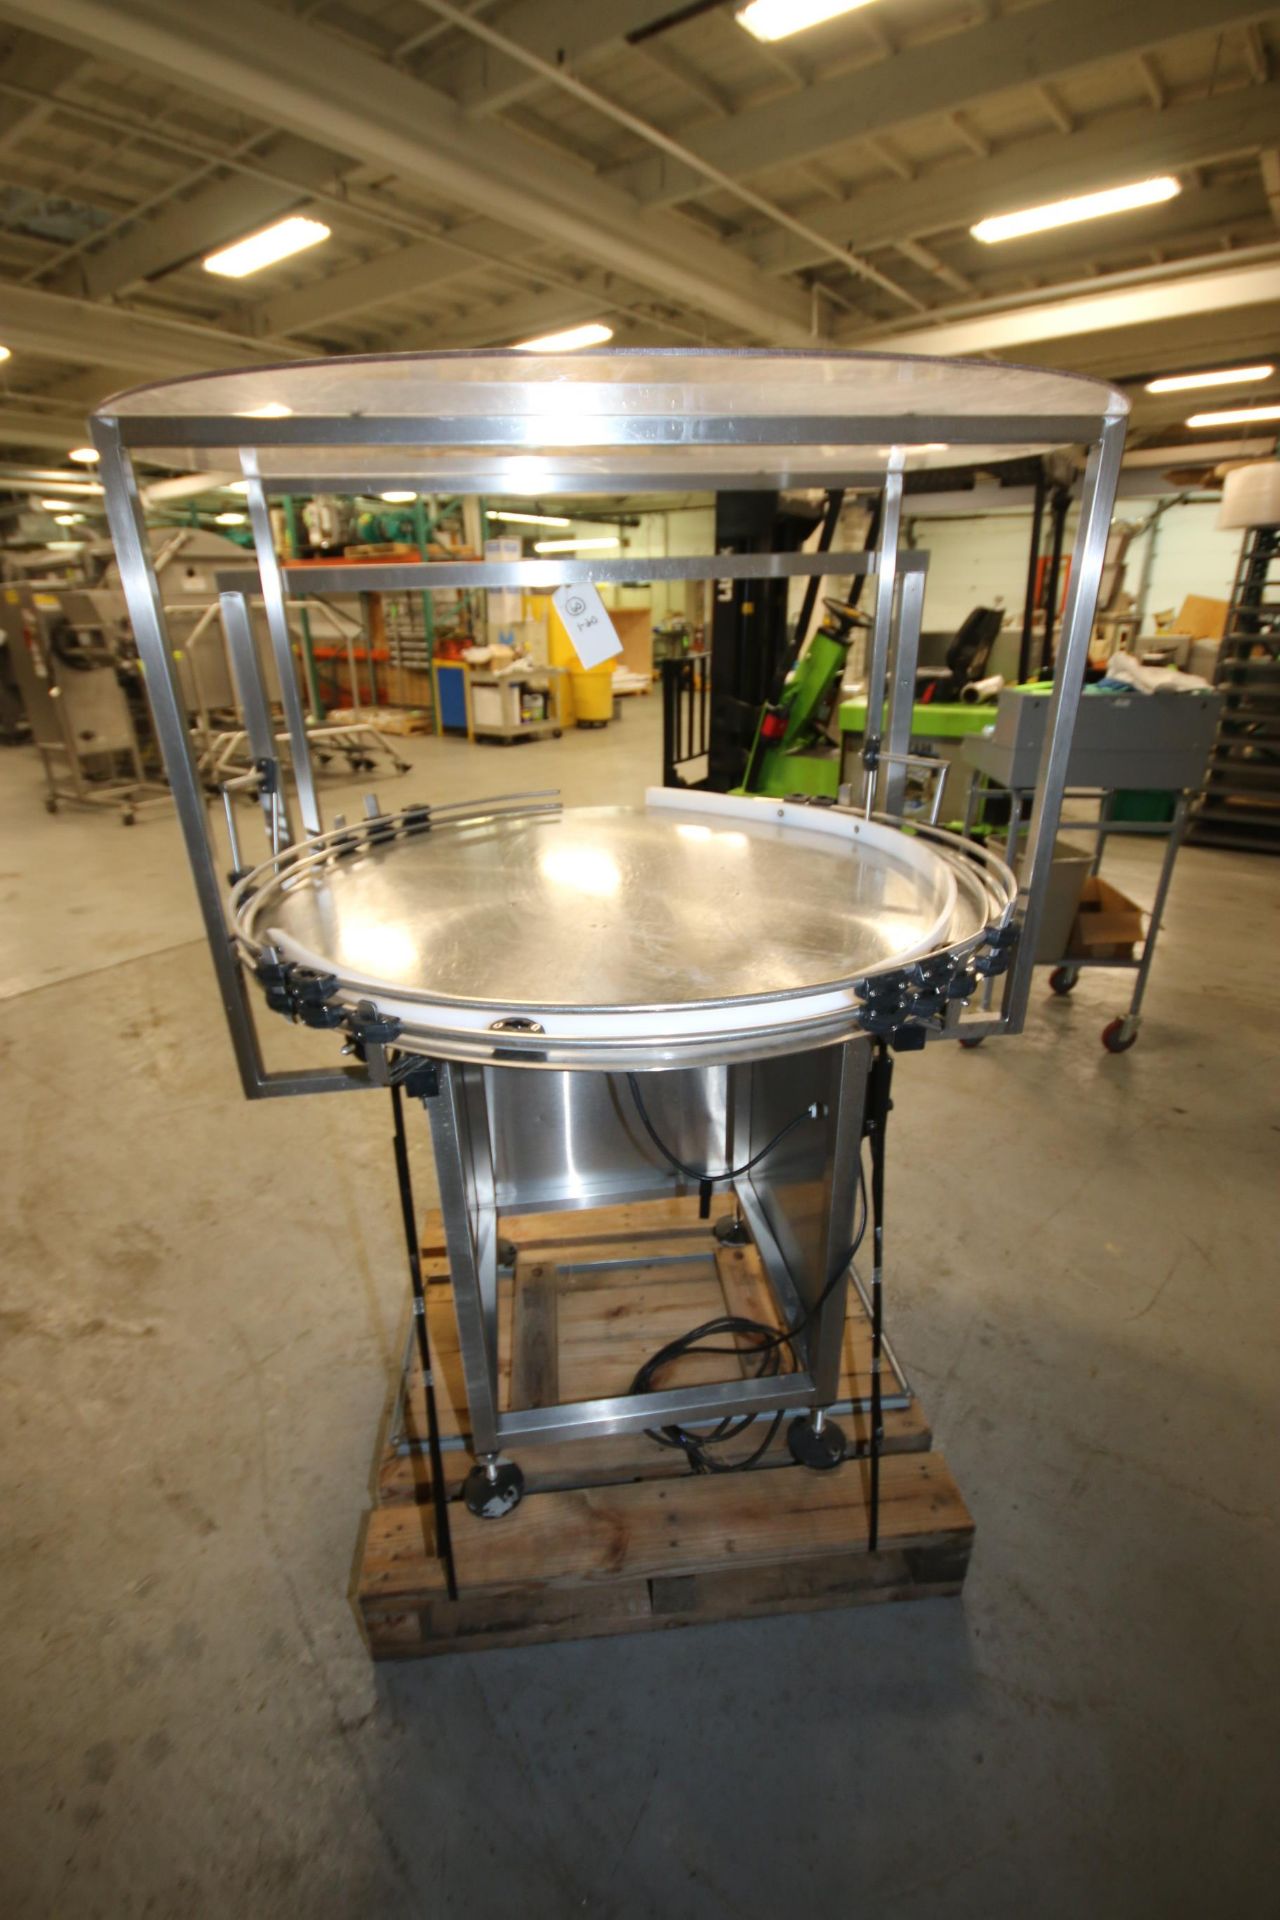 Inlne Filling Systems Aprox. 45" Dia. S/S Accumulation Table, S/N 330000, Includes Plexi-Glass - Image 6 of 8